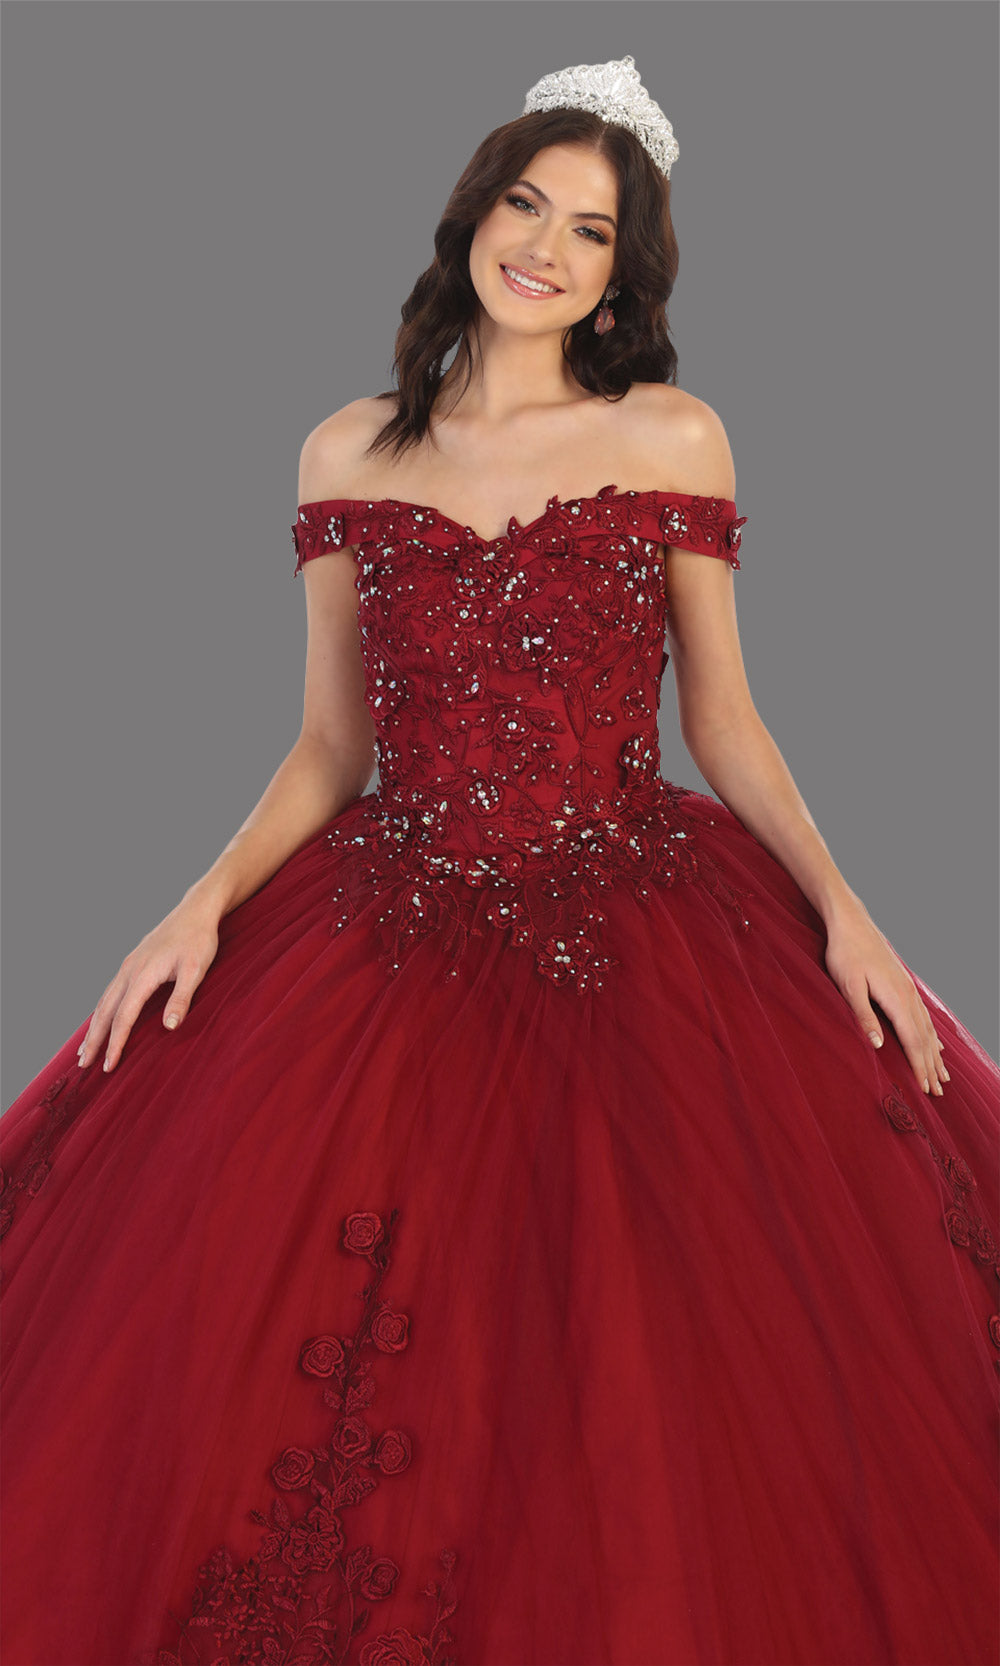 Mayqueen LK136 burgundy red quinceanera off shoulder ball gown. Dark red sequin ball gown is perfect for engagement dress, wedding reception, indowestern party gown, sweet 16, debut, sweet 15, sweet 18. Plus sizes available for ballgowns-cup.jpg